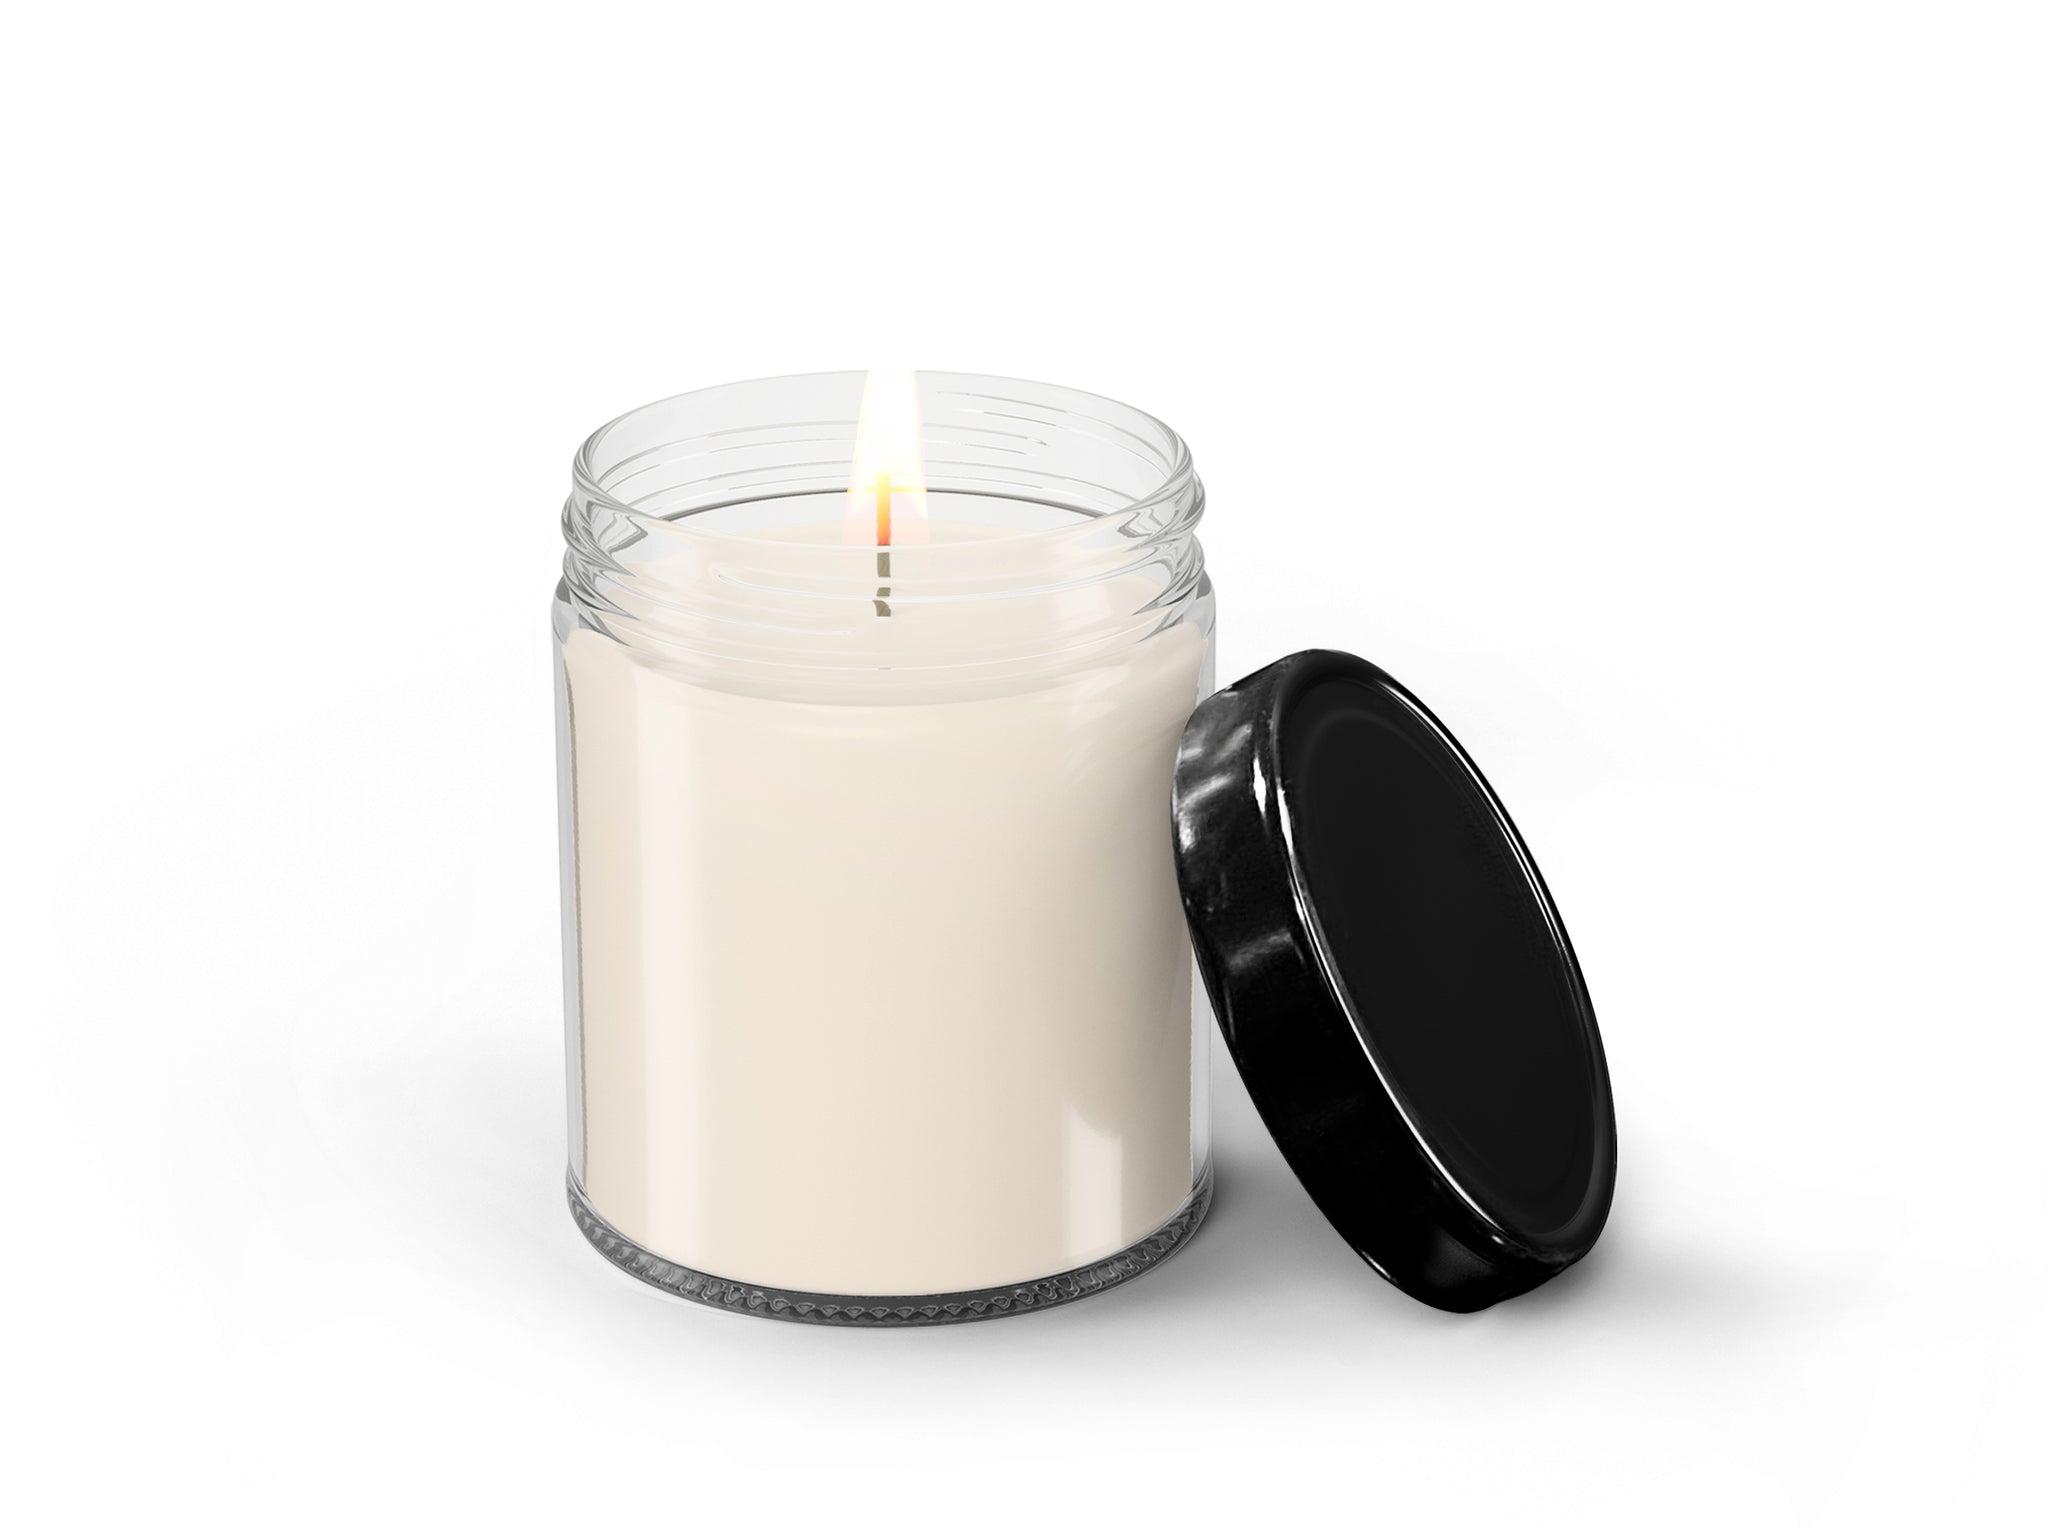 Charcoal Vanilla 100% Soy Candle with Organic Cotton Long Burn Wick in 8oz  Black Tin